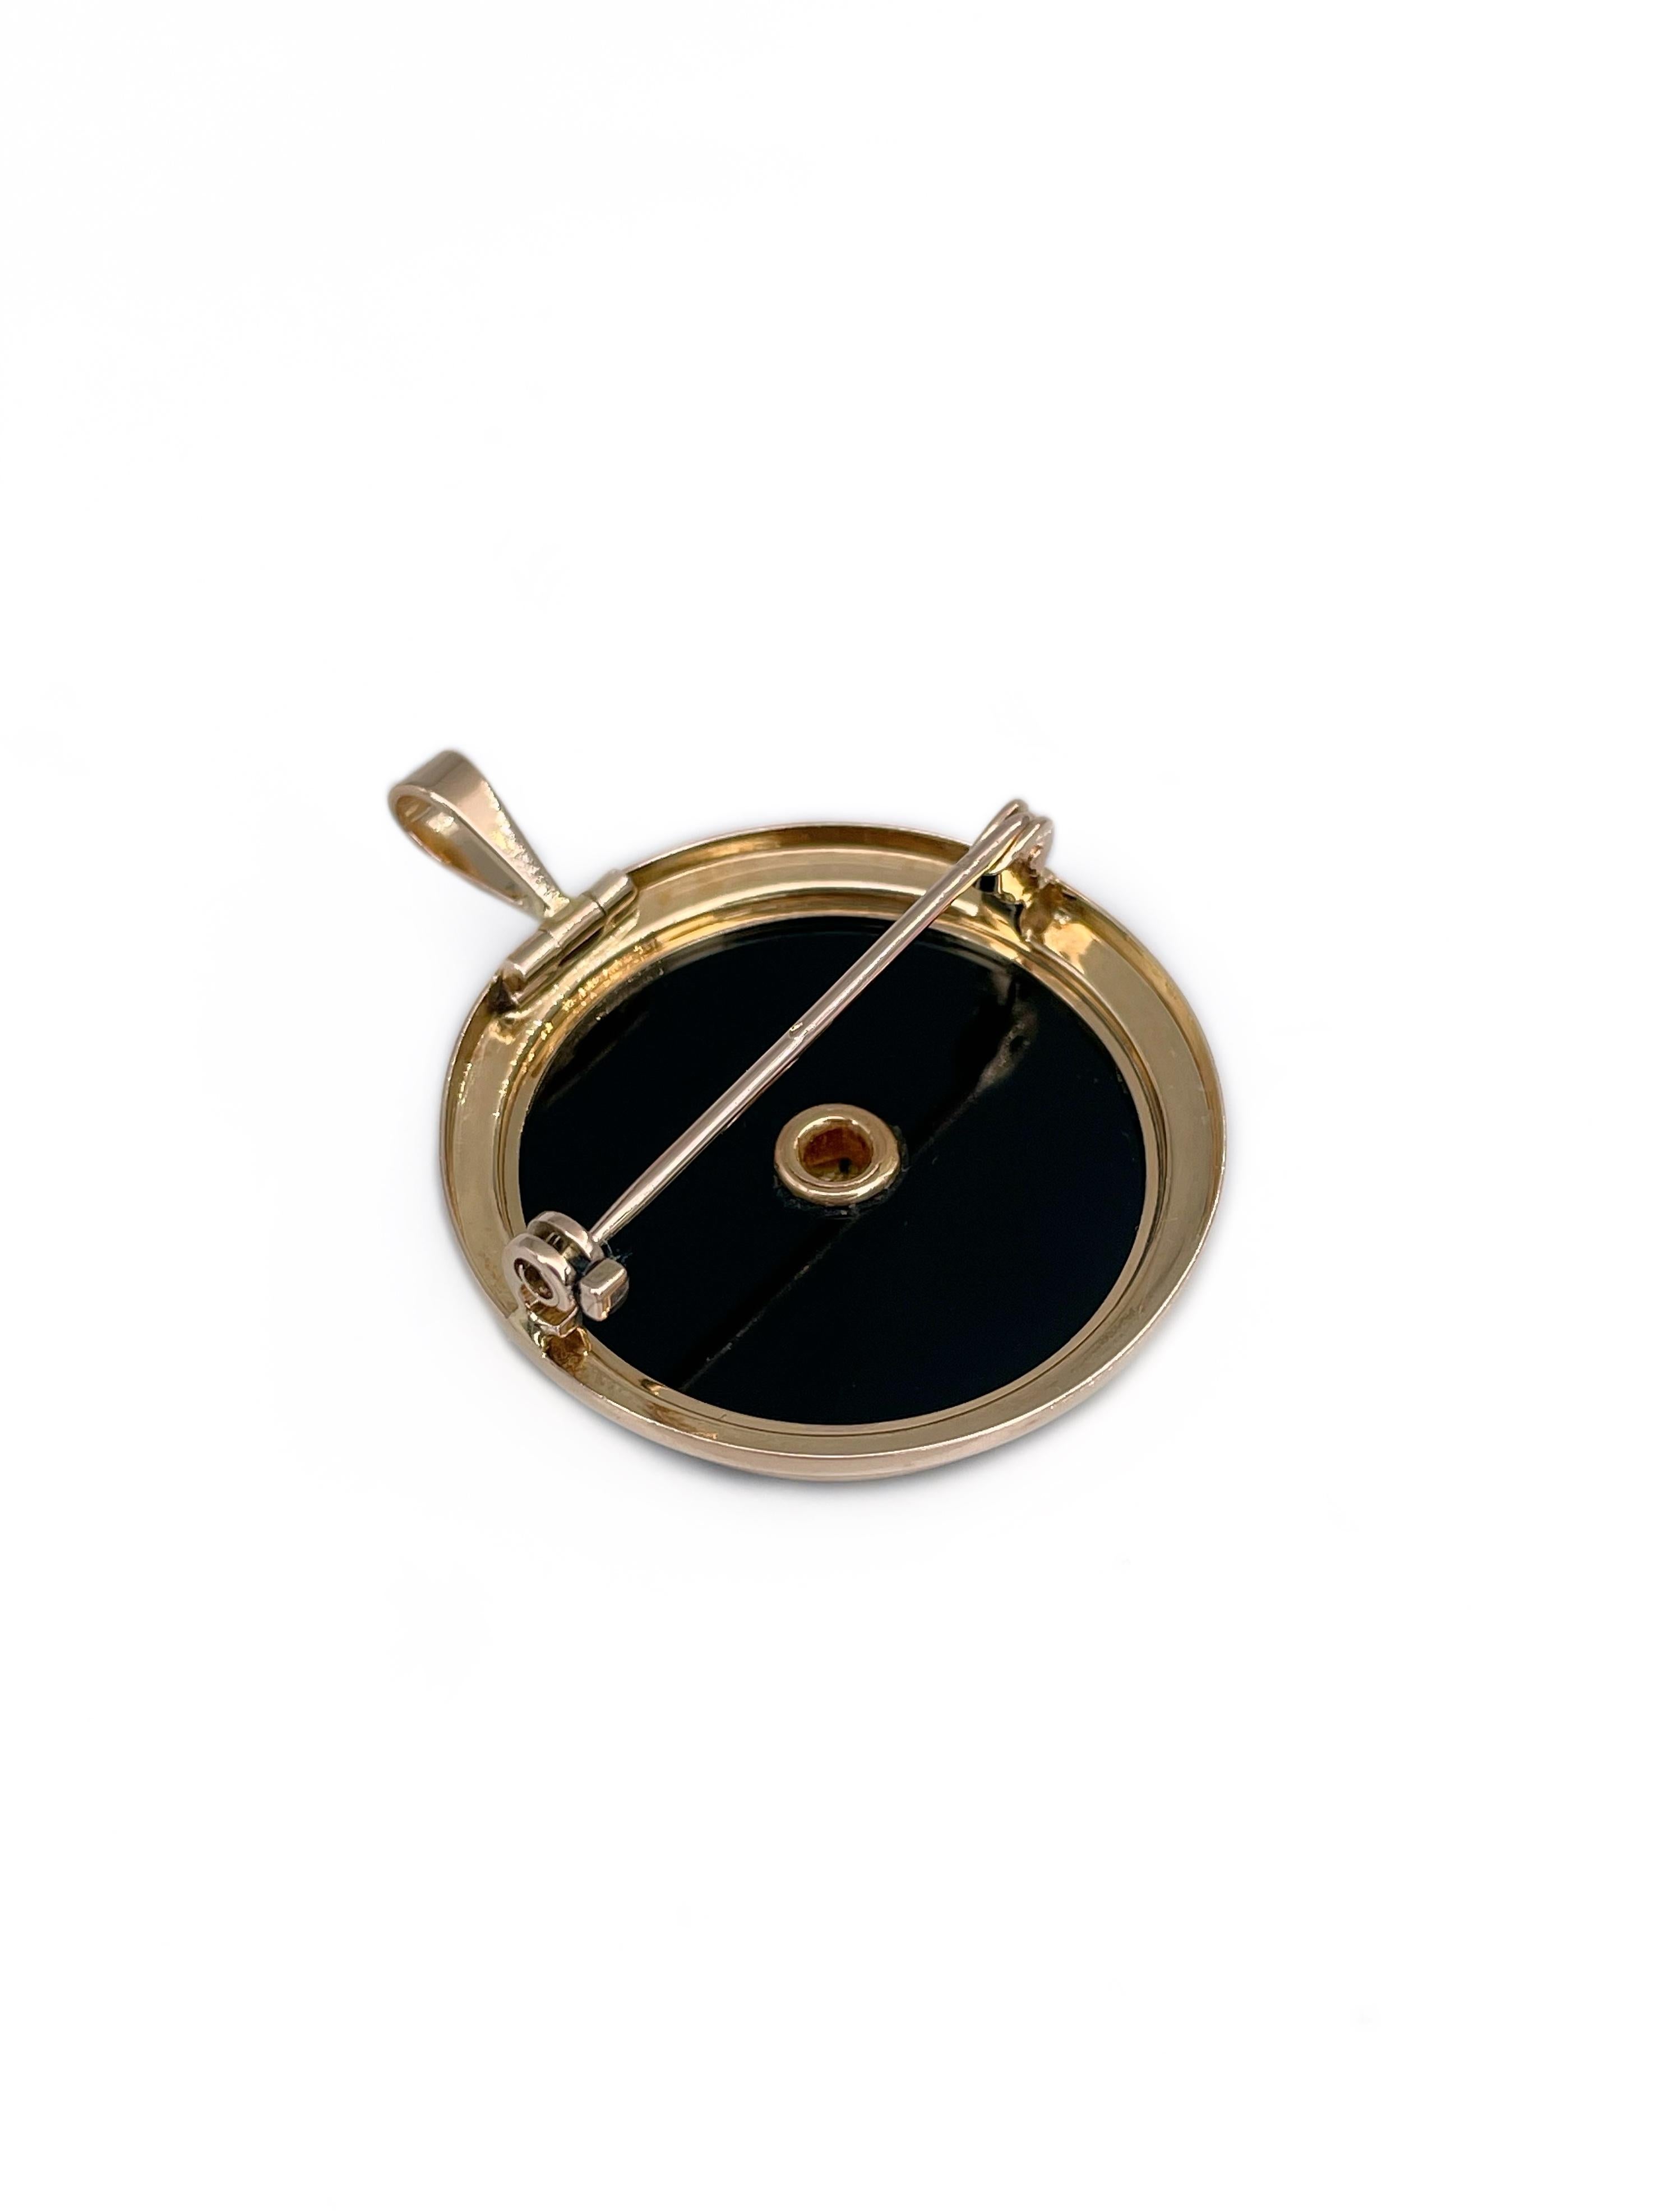 Victorian 18 Karat Gold Lady Miniature Portrait Signed Onyx Round Pendant Brooch In Good Condition For Sale In Vilnius, LT